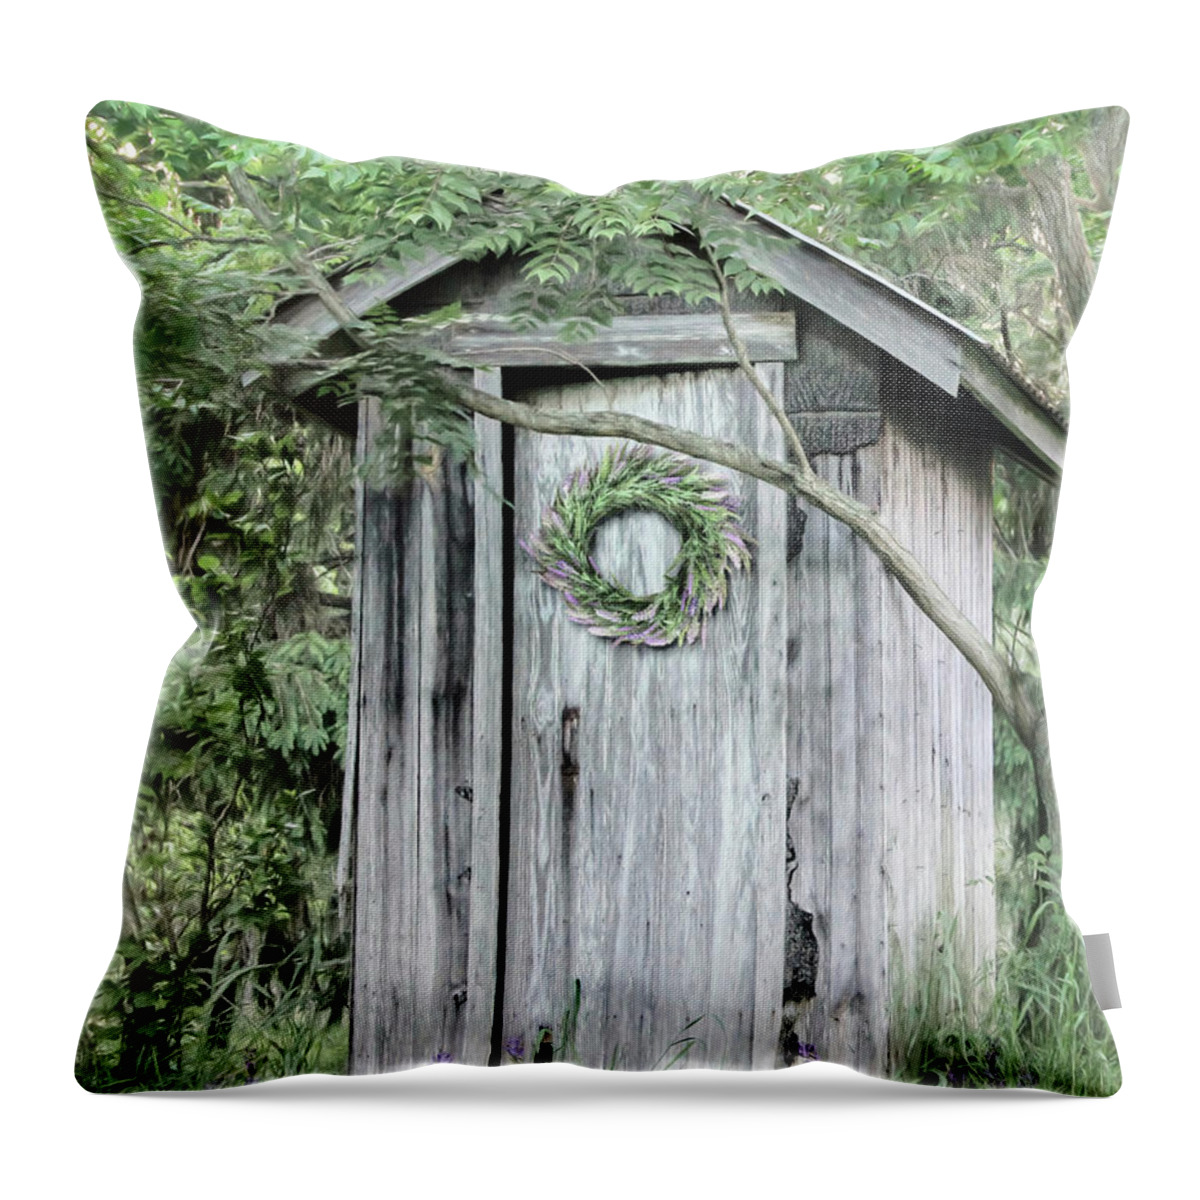 Outhouse Throw Pillow featuring the photograph Lavender Outhouse by Lori Deiter